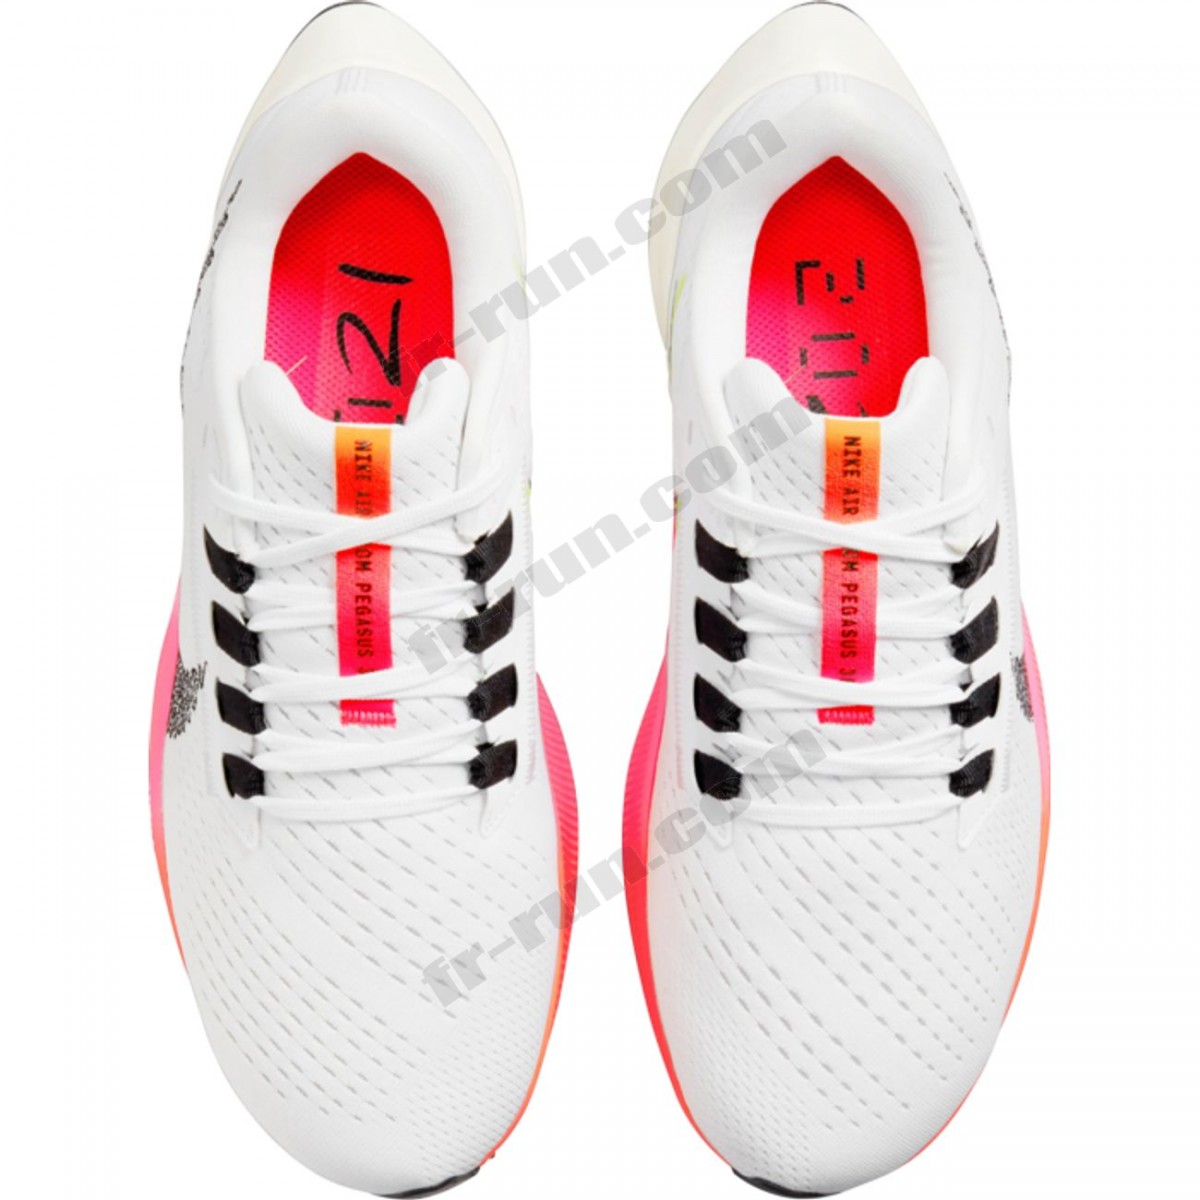 Nike/CHAUSSURES BASSES running femme NIKE W NIKE AIR ZOOM PEGASUS 38 T √ Nouveau style √ Soldes - -3